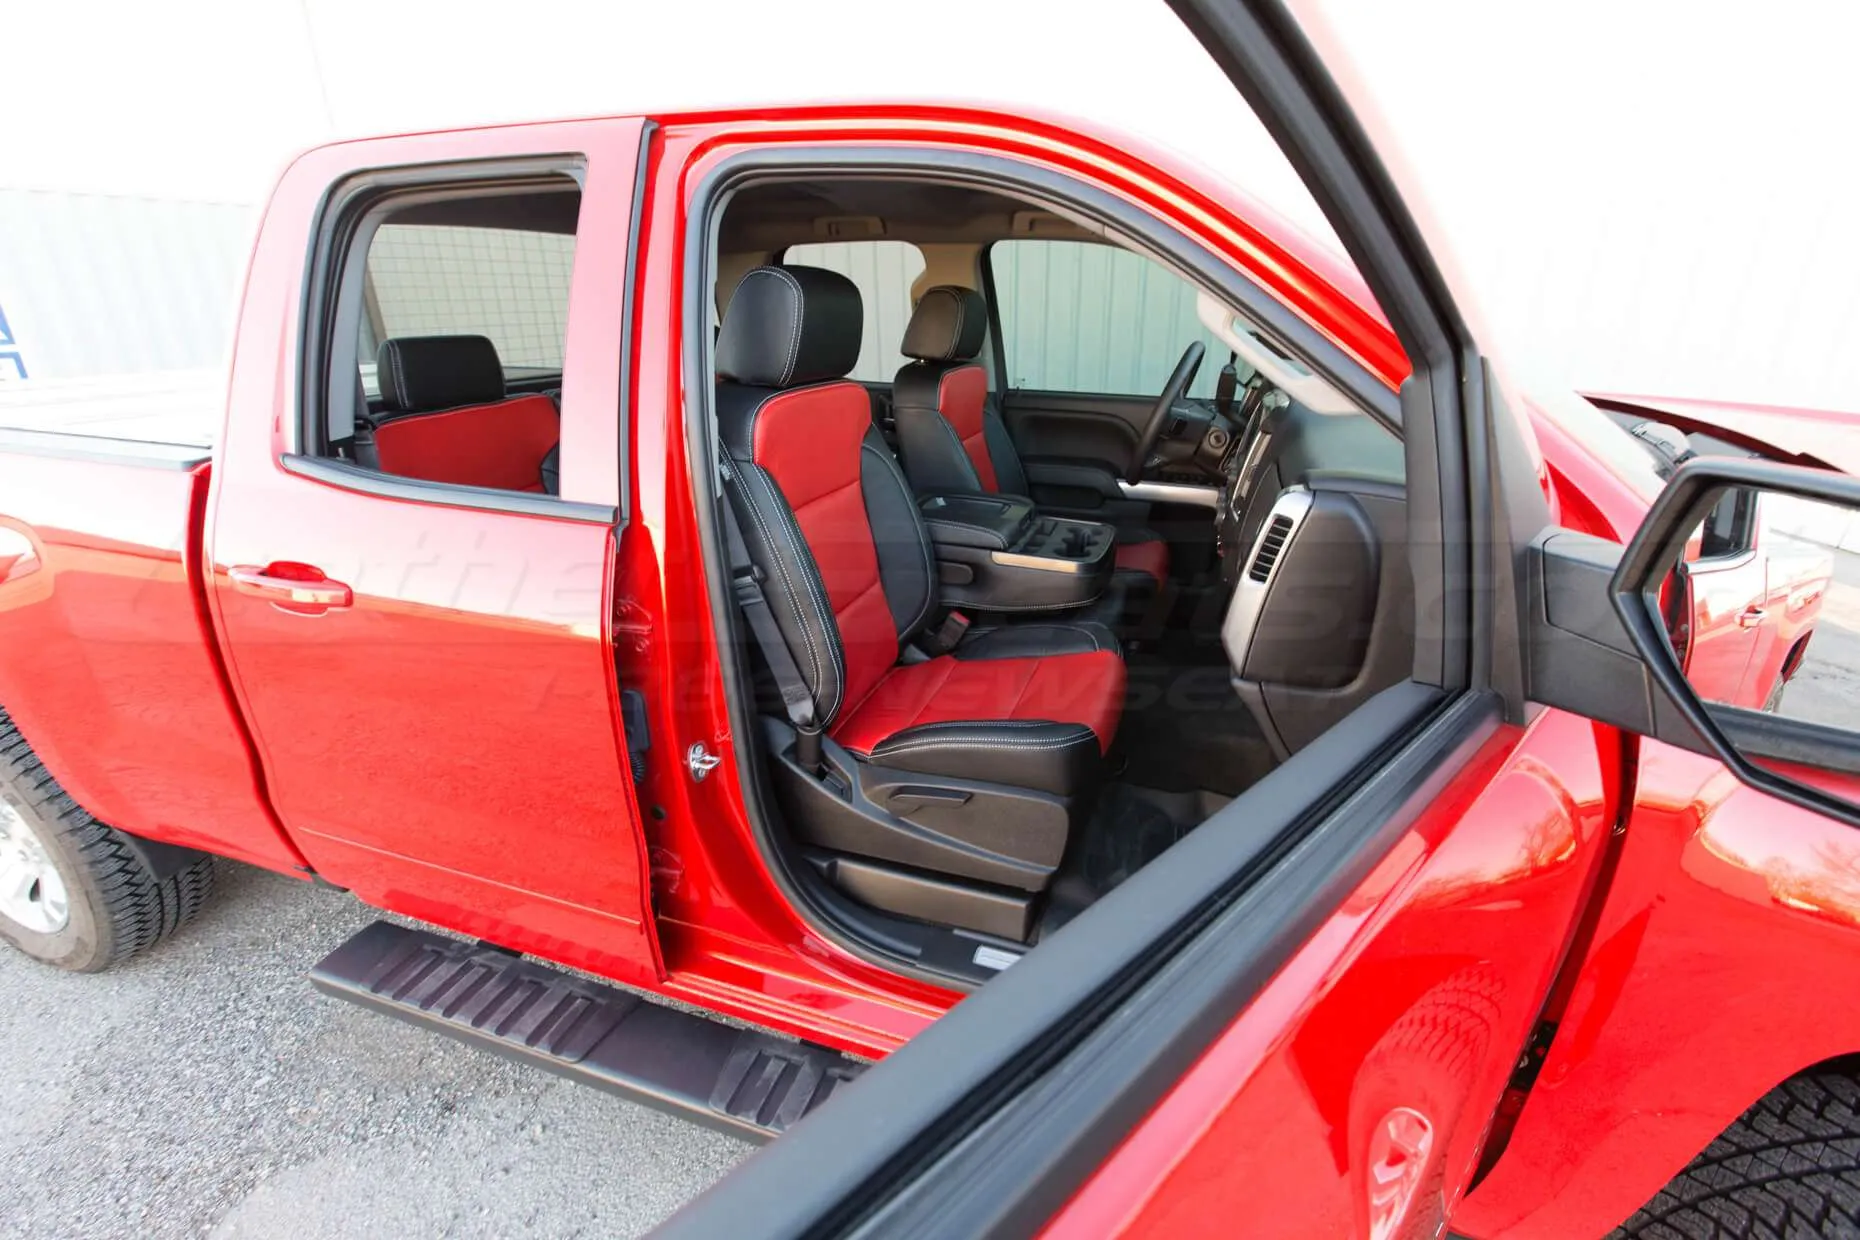 GMC Sierra leather upholstery kit - Black and Bright Red - Installed Passenger front seat